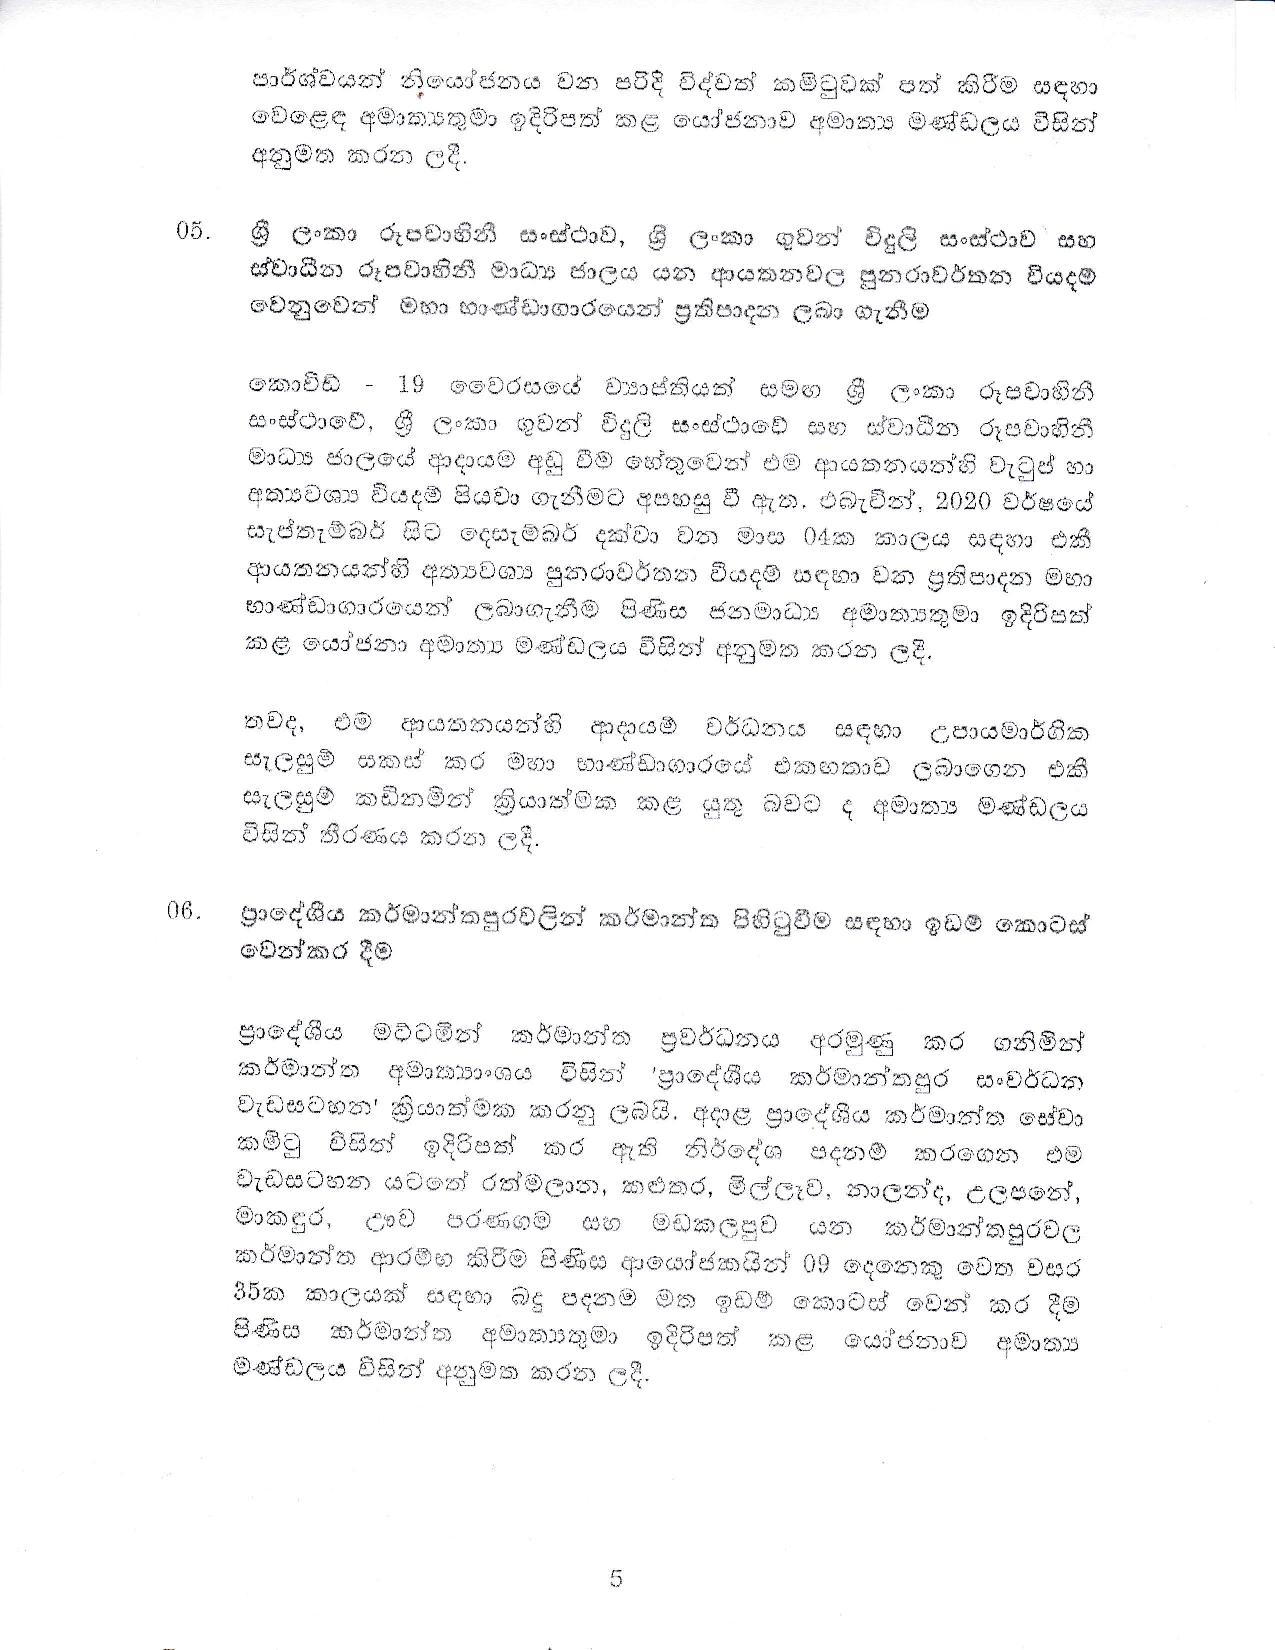 Cabinet decision on 02.09.2020 page 005